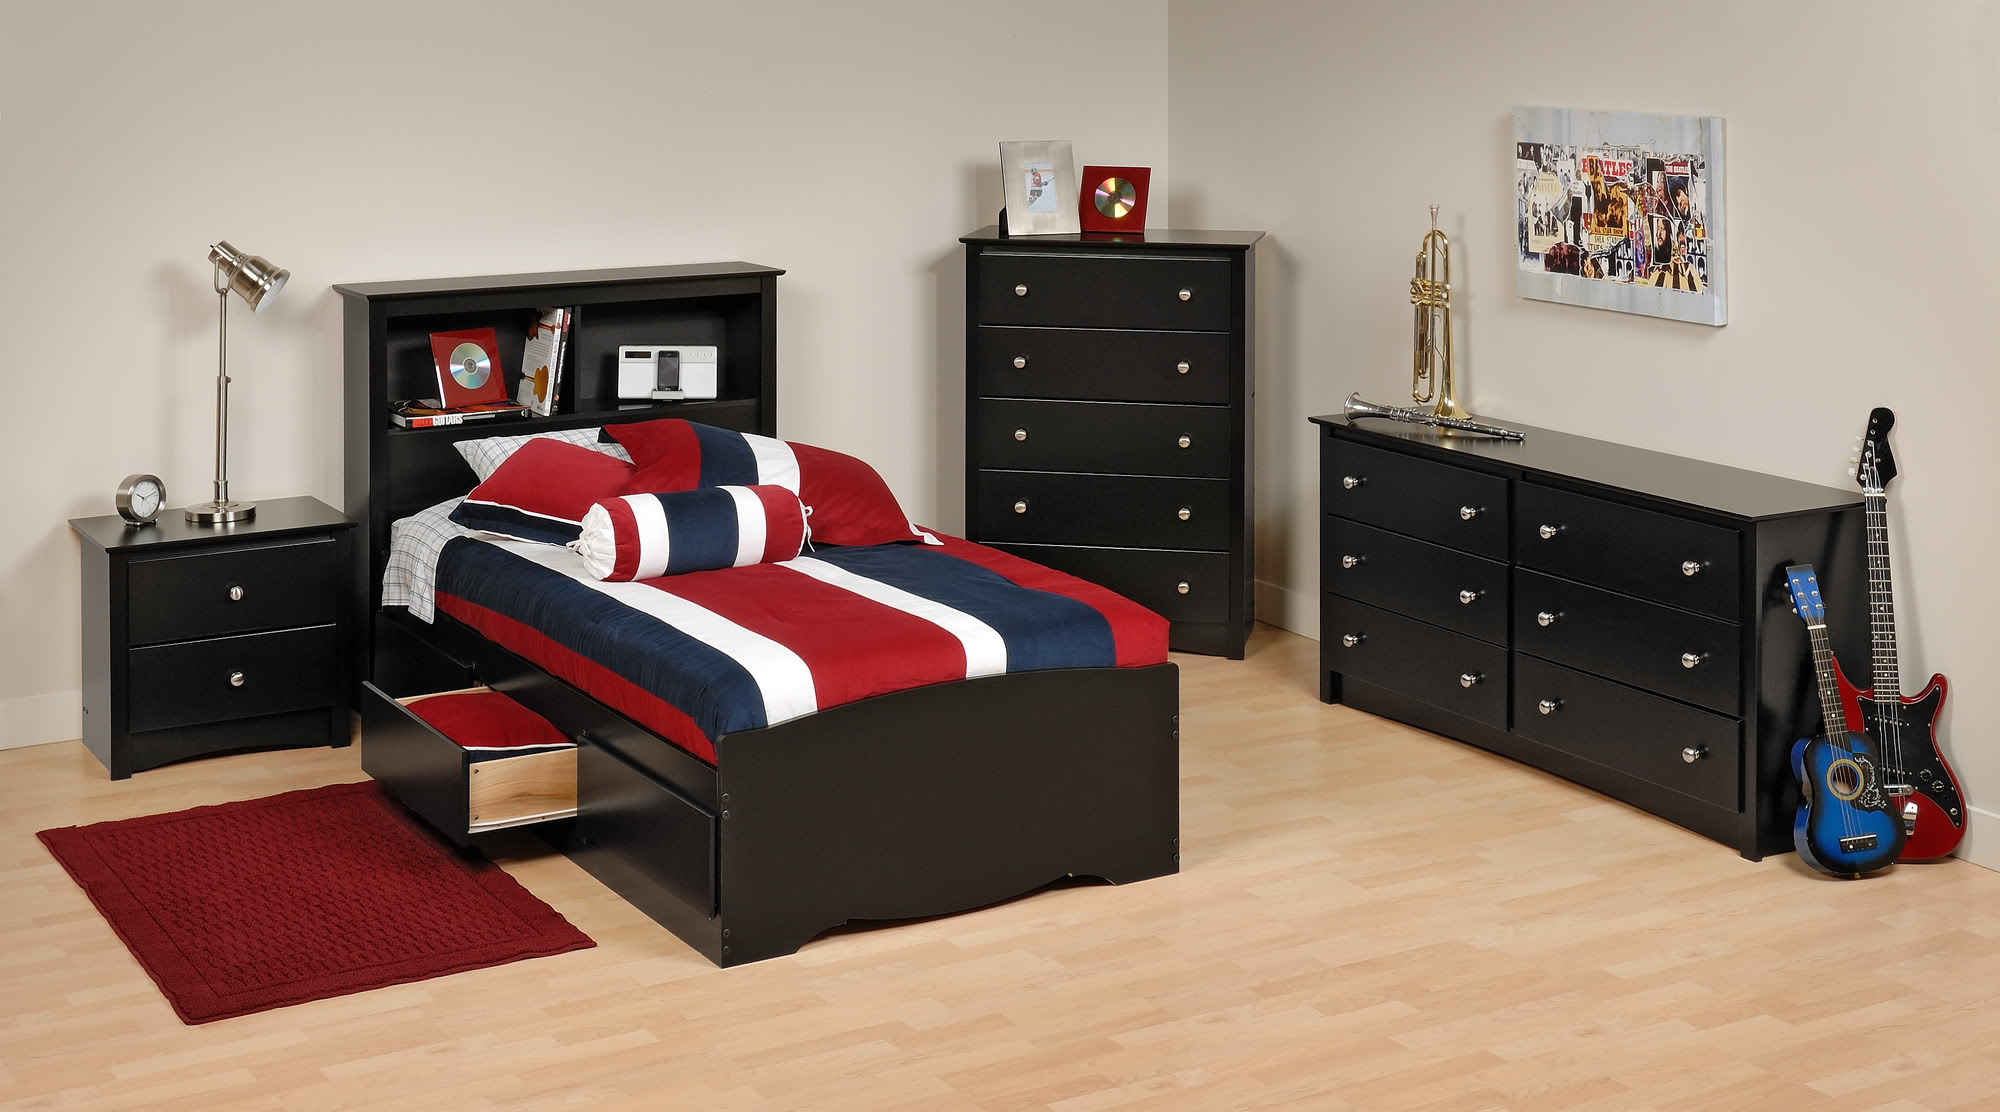 Black Twin Bedroom Furniture Home Decor Photos Gallery intended for measurements 2000 X 1112